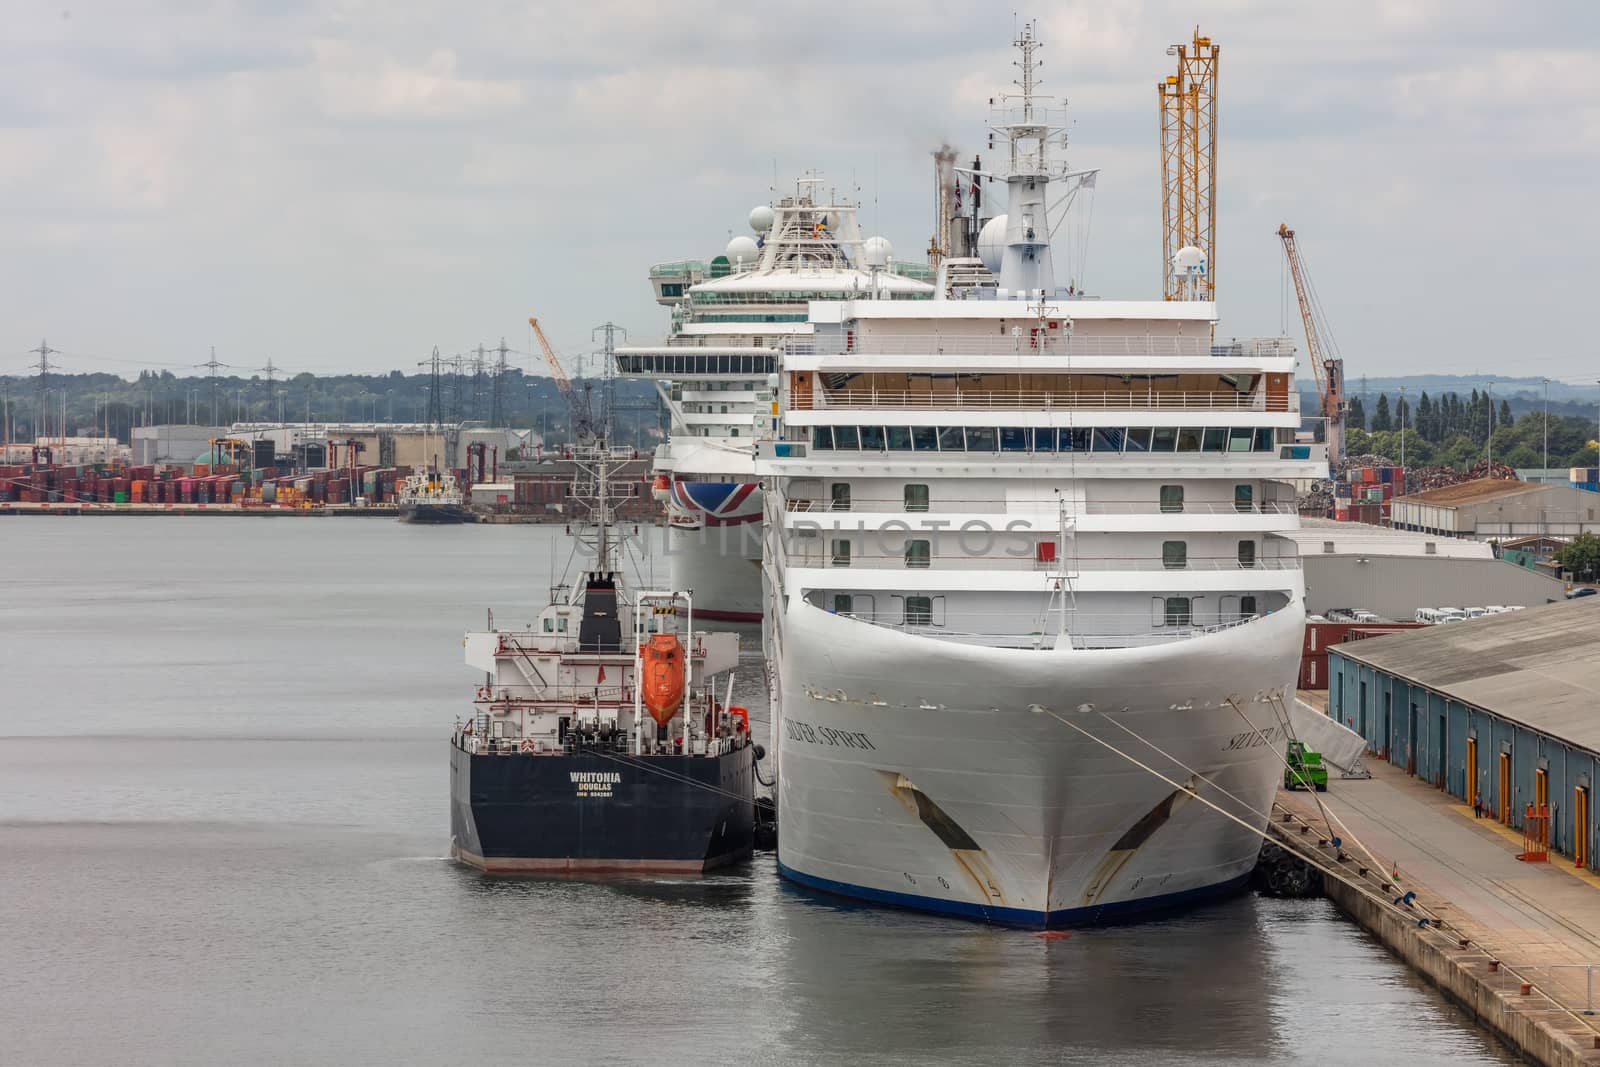 Cruise ship docked in Southampton port and being refueled by DamantisZ